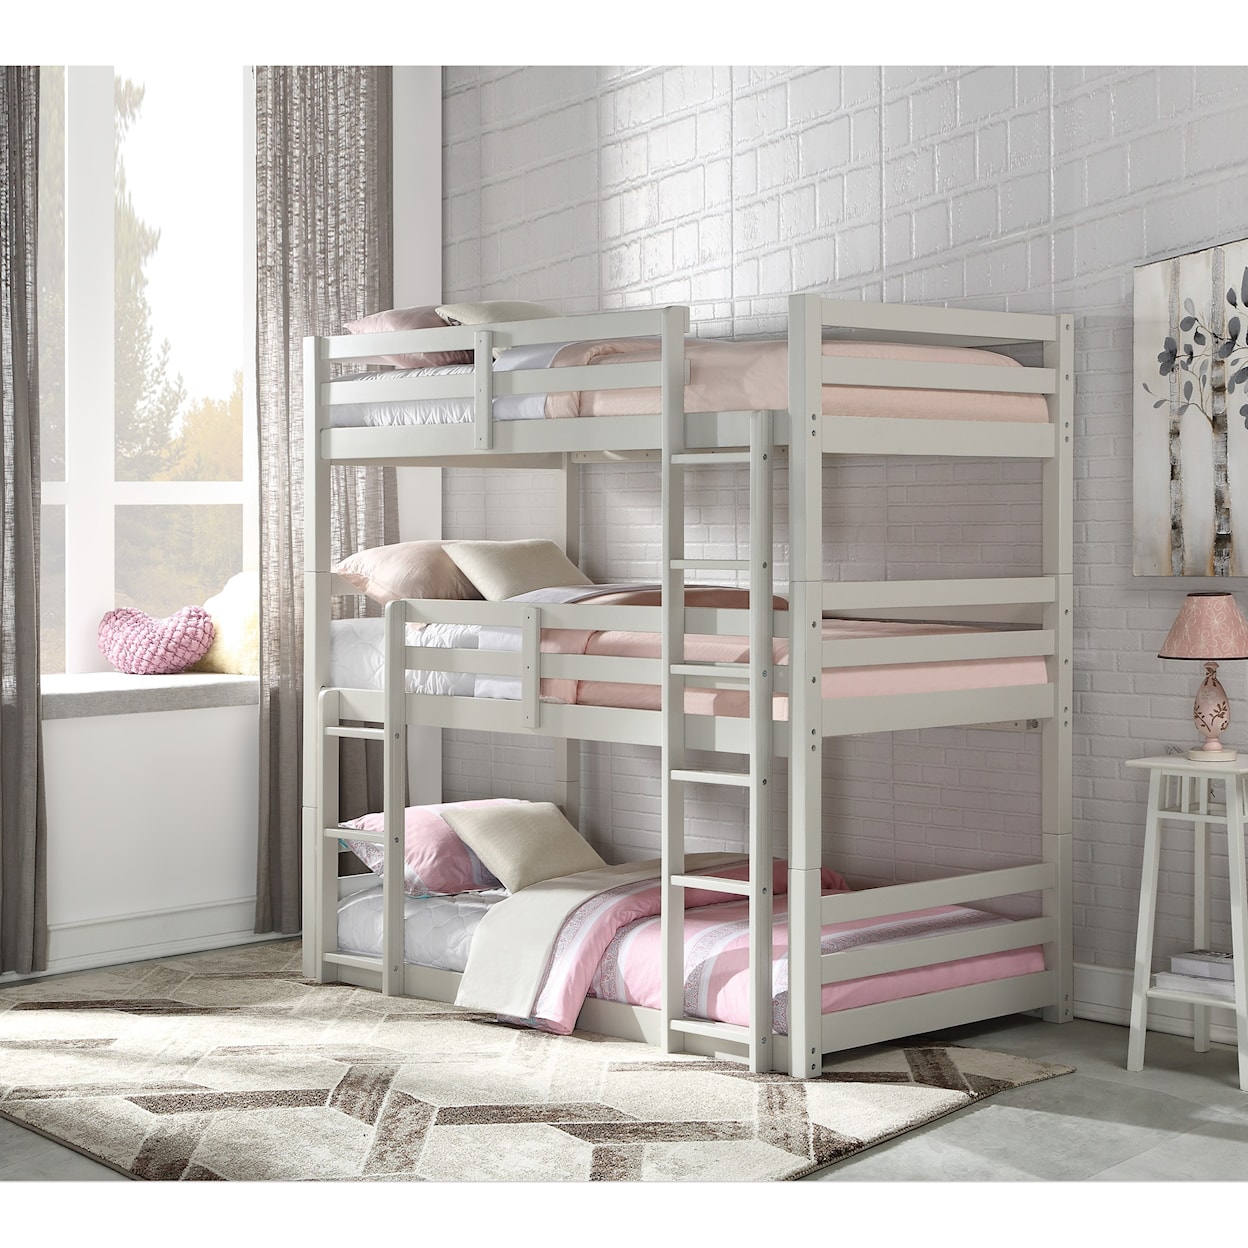 Acme Furniture Ronnie Bunk Bed - Triple Twin